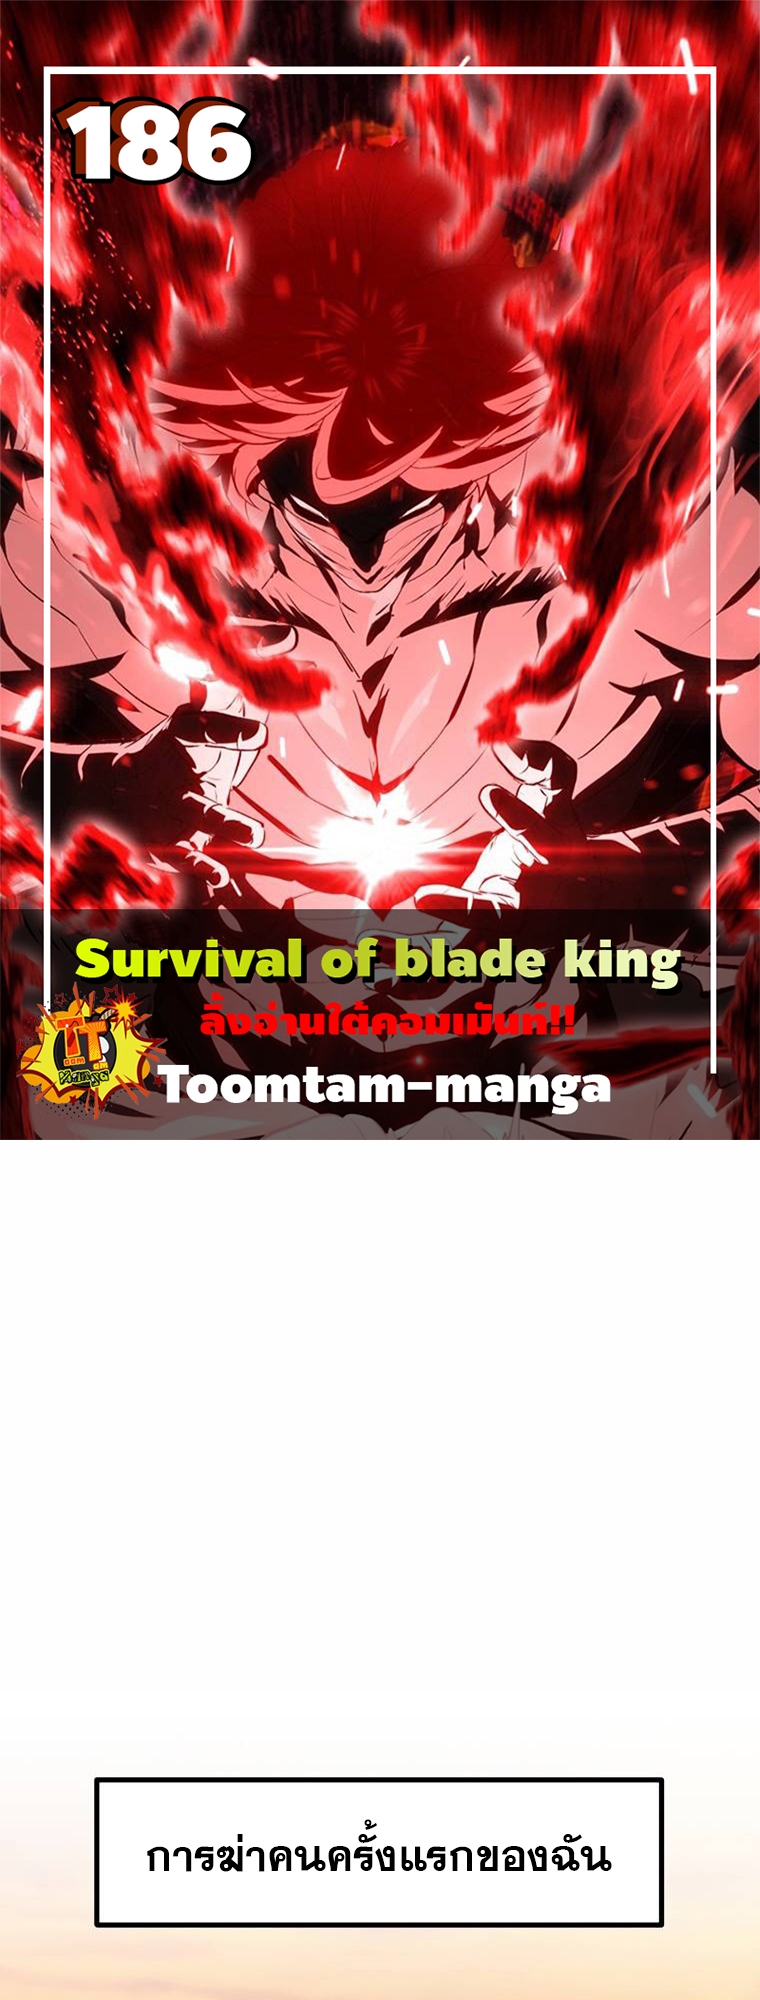 Survival of blade king 186 13 1 25670001